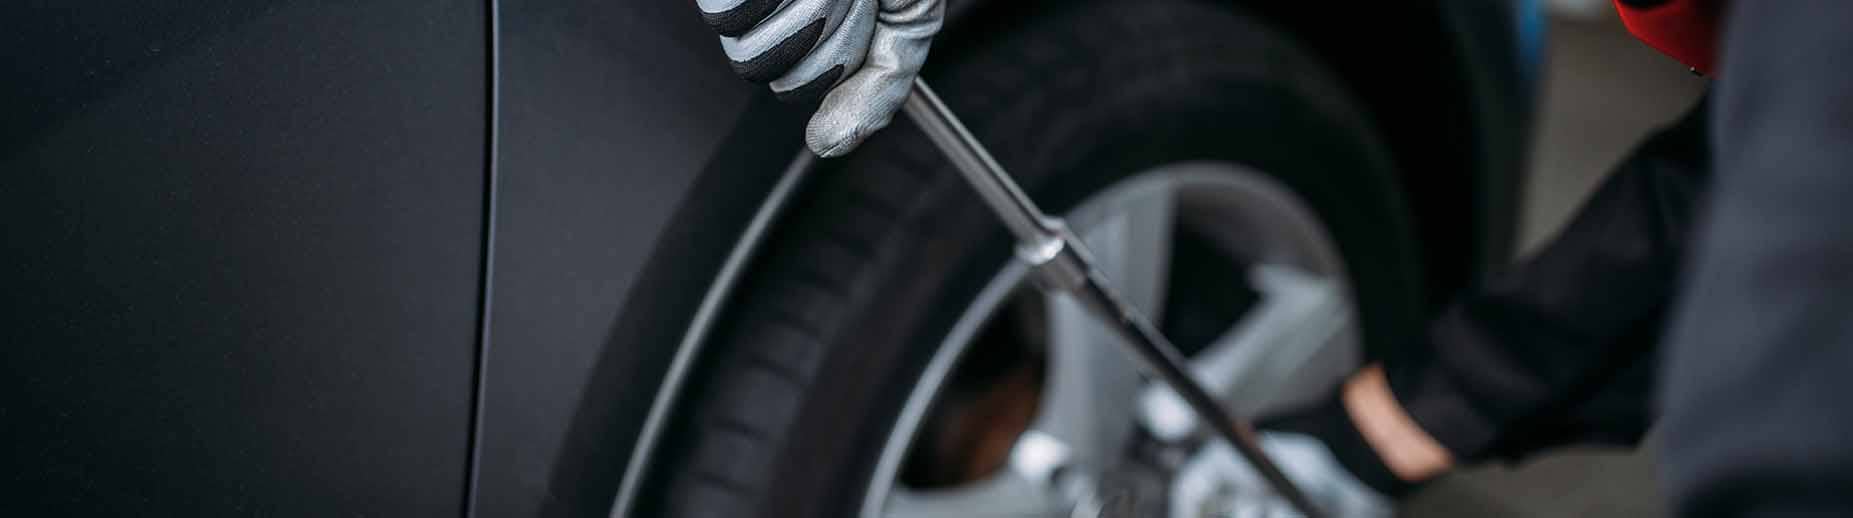 Andover Tire Balancing Services, Tire Rotation and Tire Repair